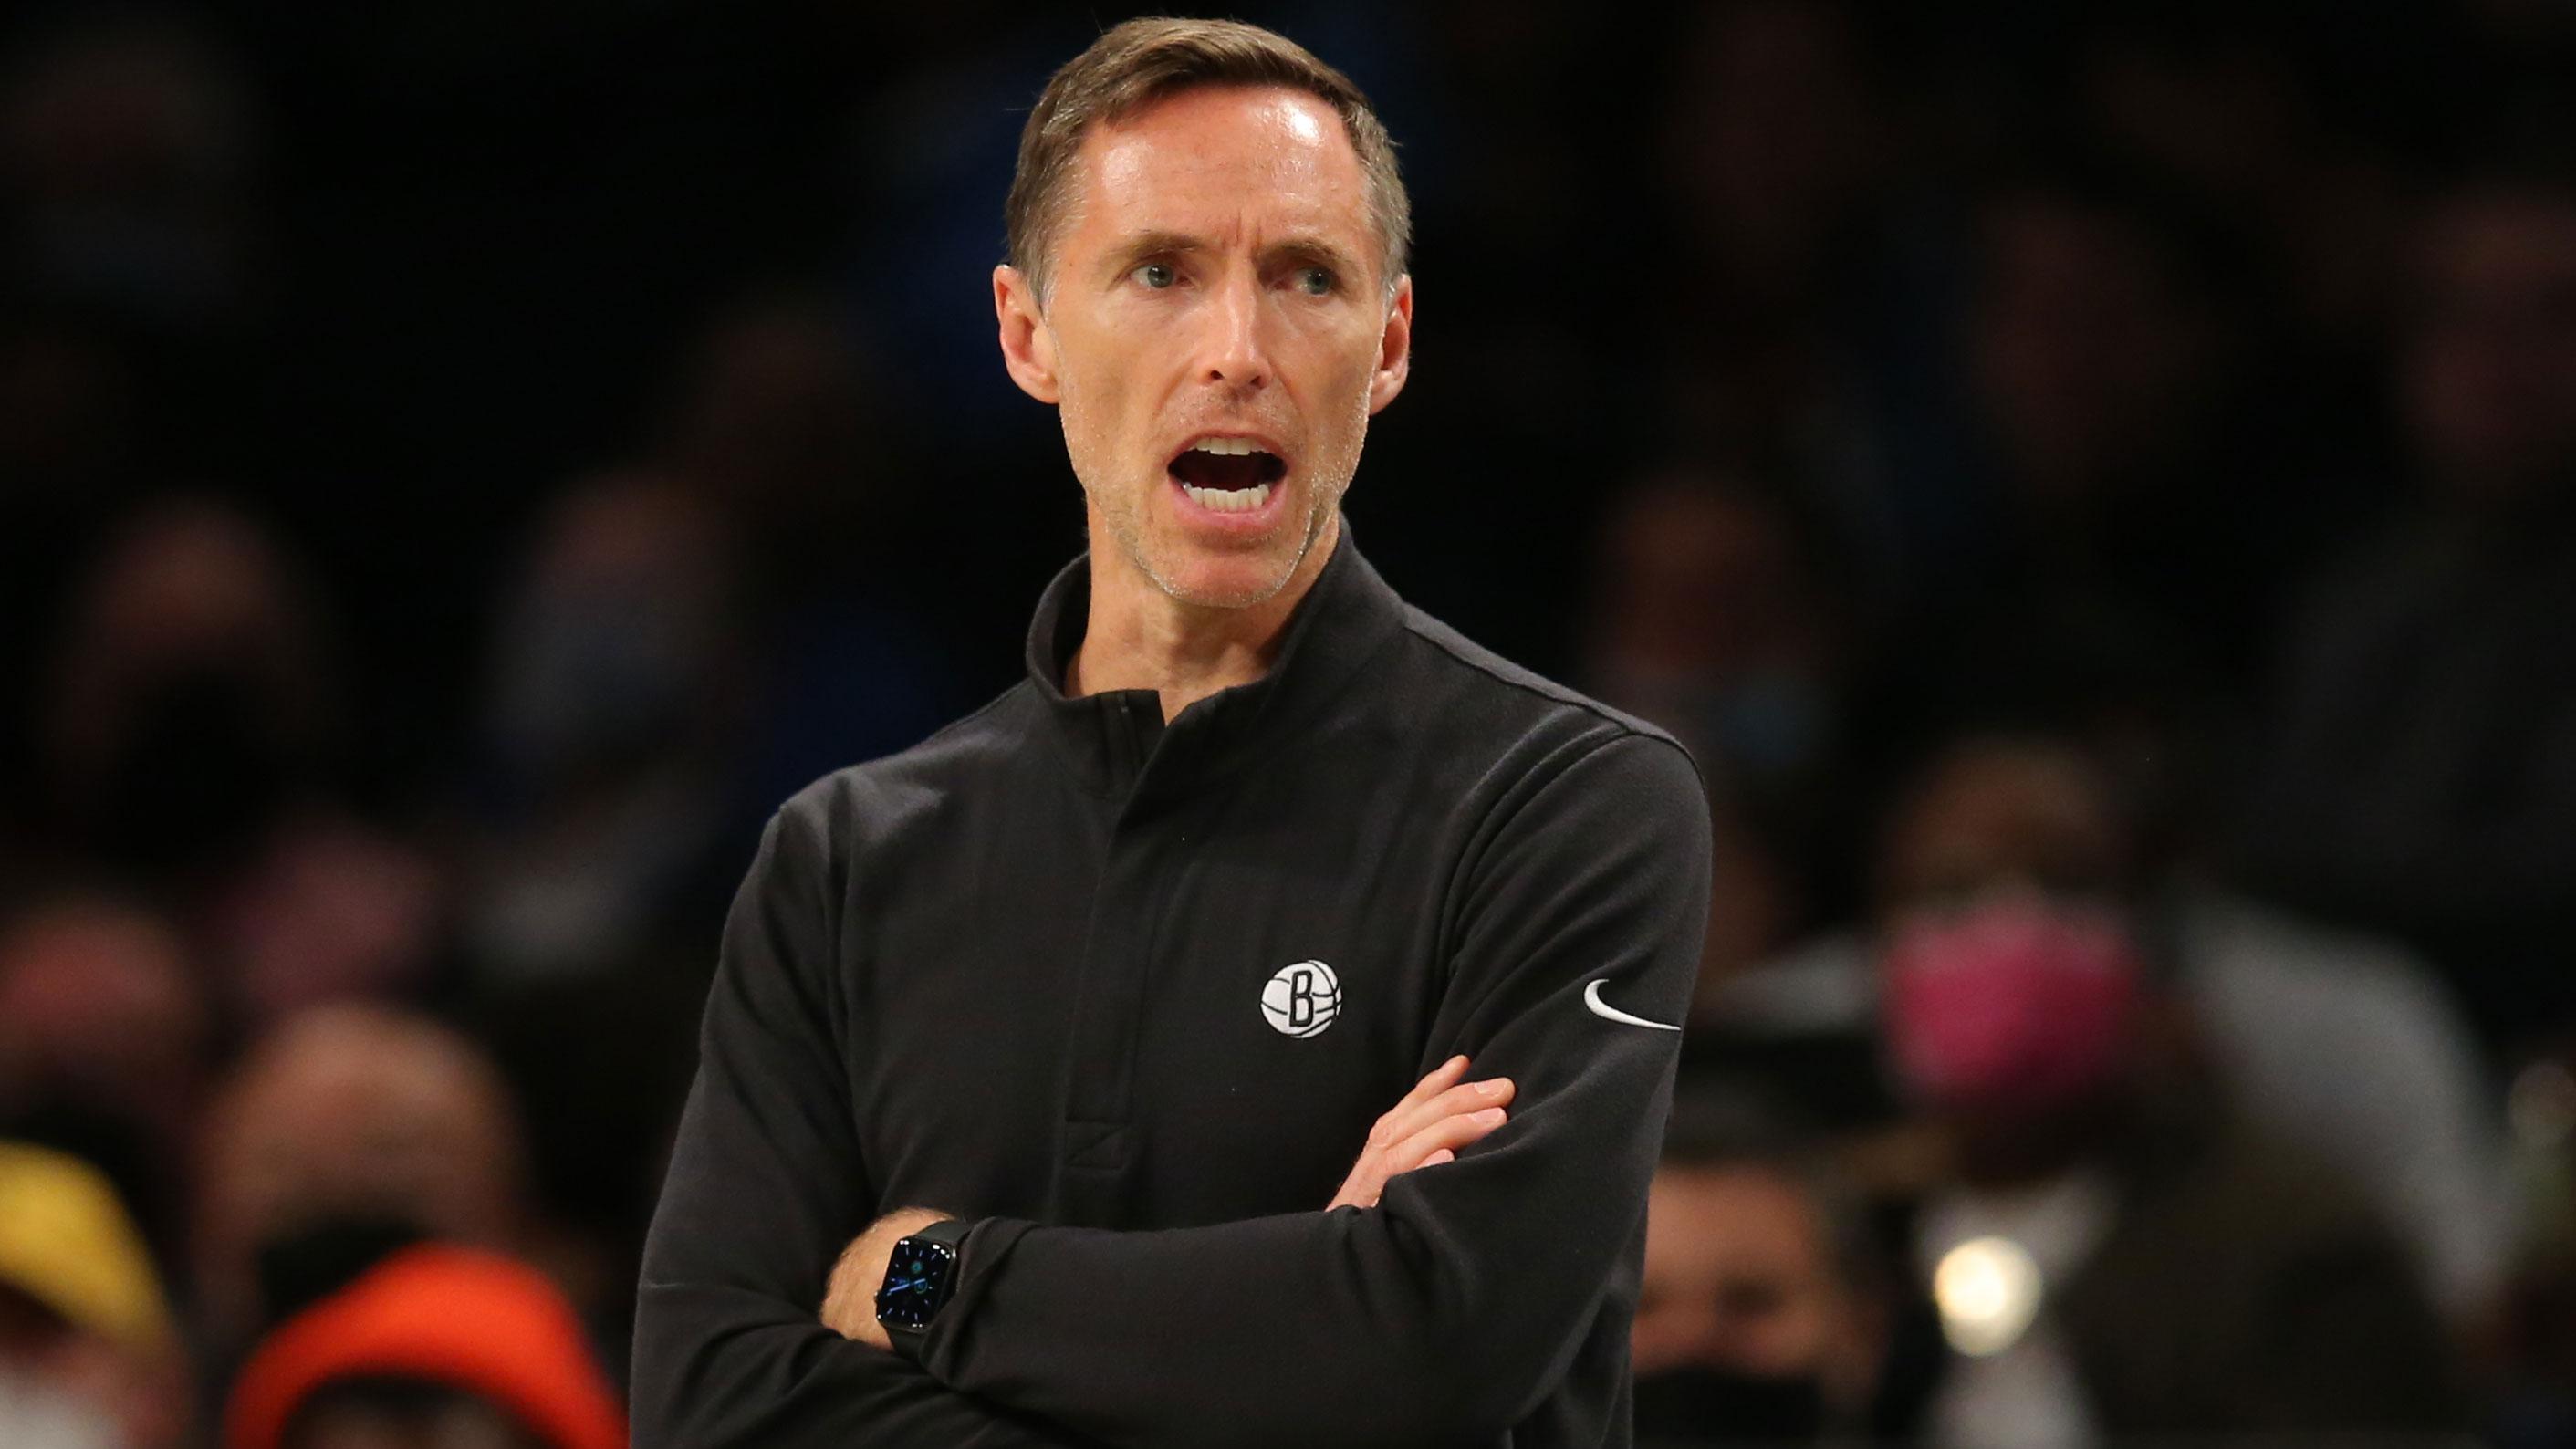 Oct 14, 2021; Brooklyn, New York, USA; Brooklyn Nets head coach Steve Nash coaches against the Minnesota Timberwolves during the first quarter at Barclays Center. / Brad Penner-USA TODAY Sports